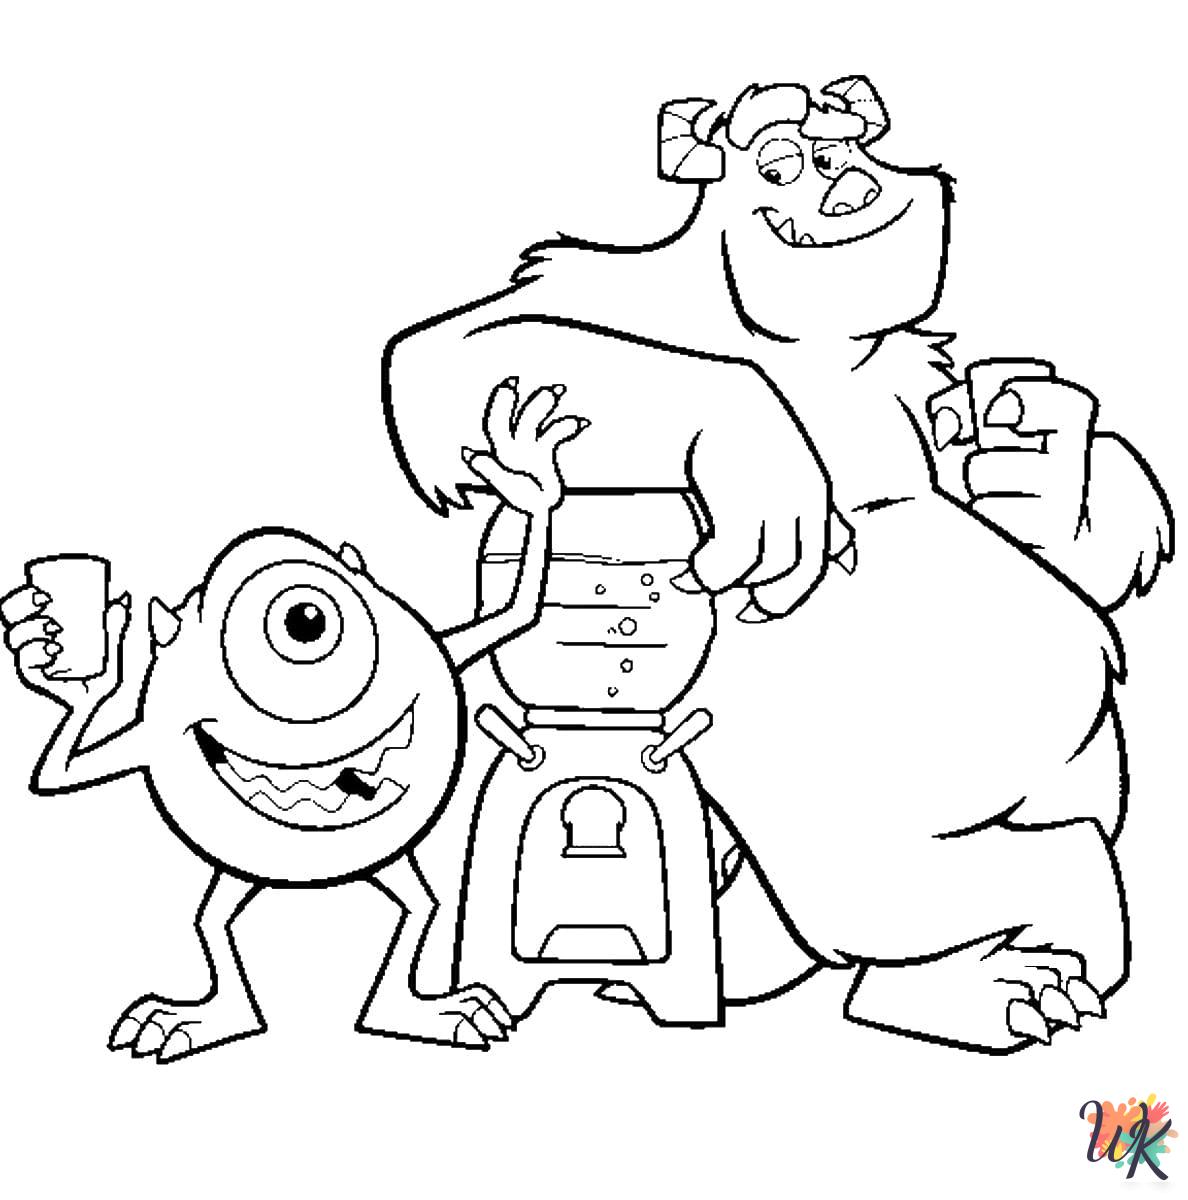 free full size printable Monsters Inc. coloring pages for adults pdf